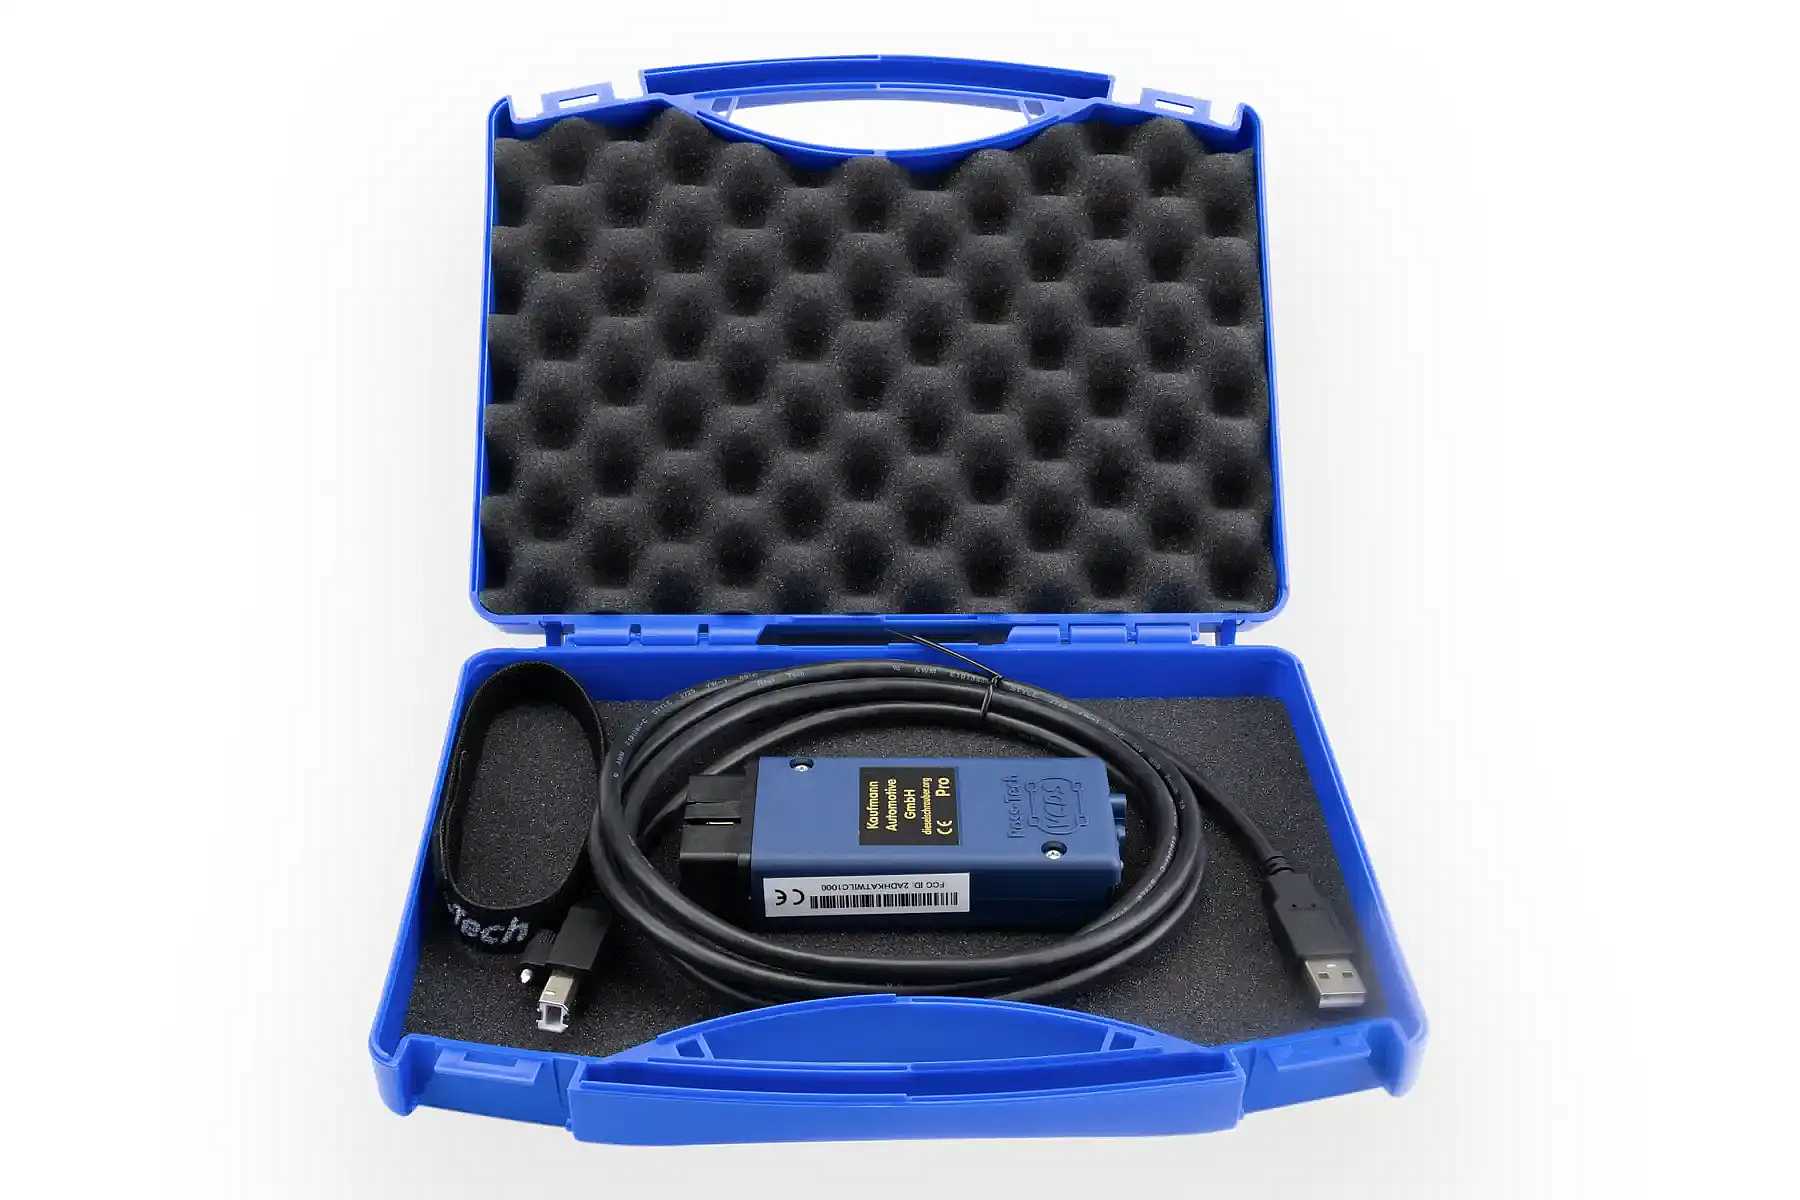 Ross-Tech HEX-NET VCDS® WiFi OBD II Diagnostic Tool Professional for VAG